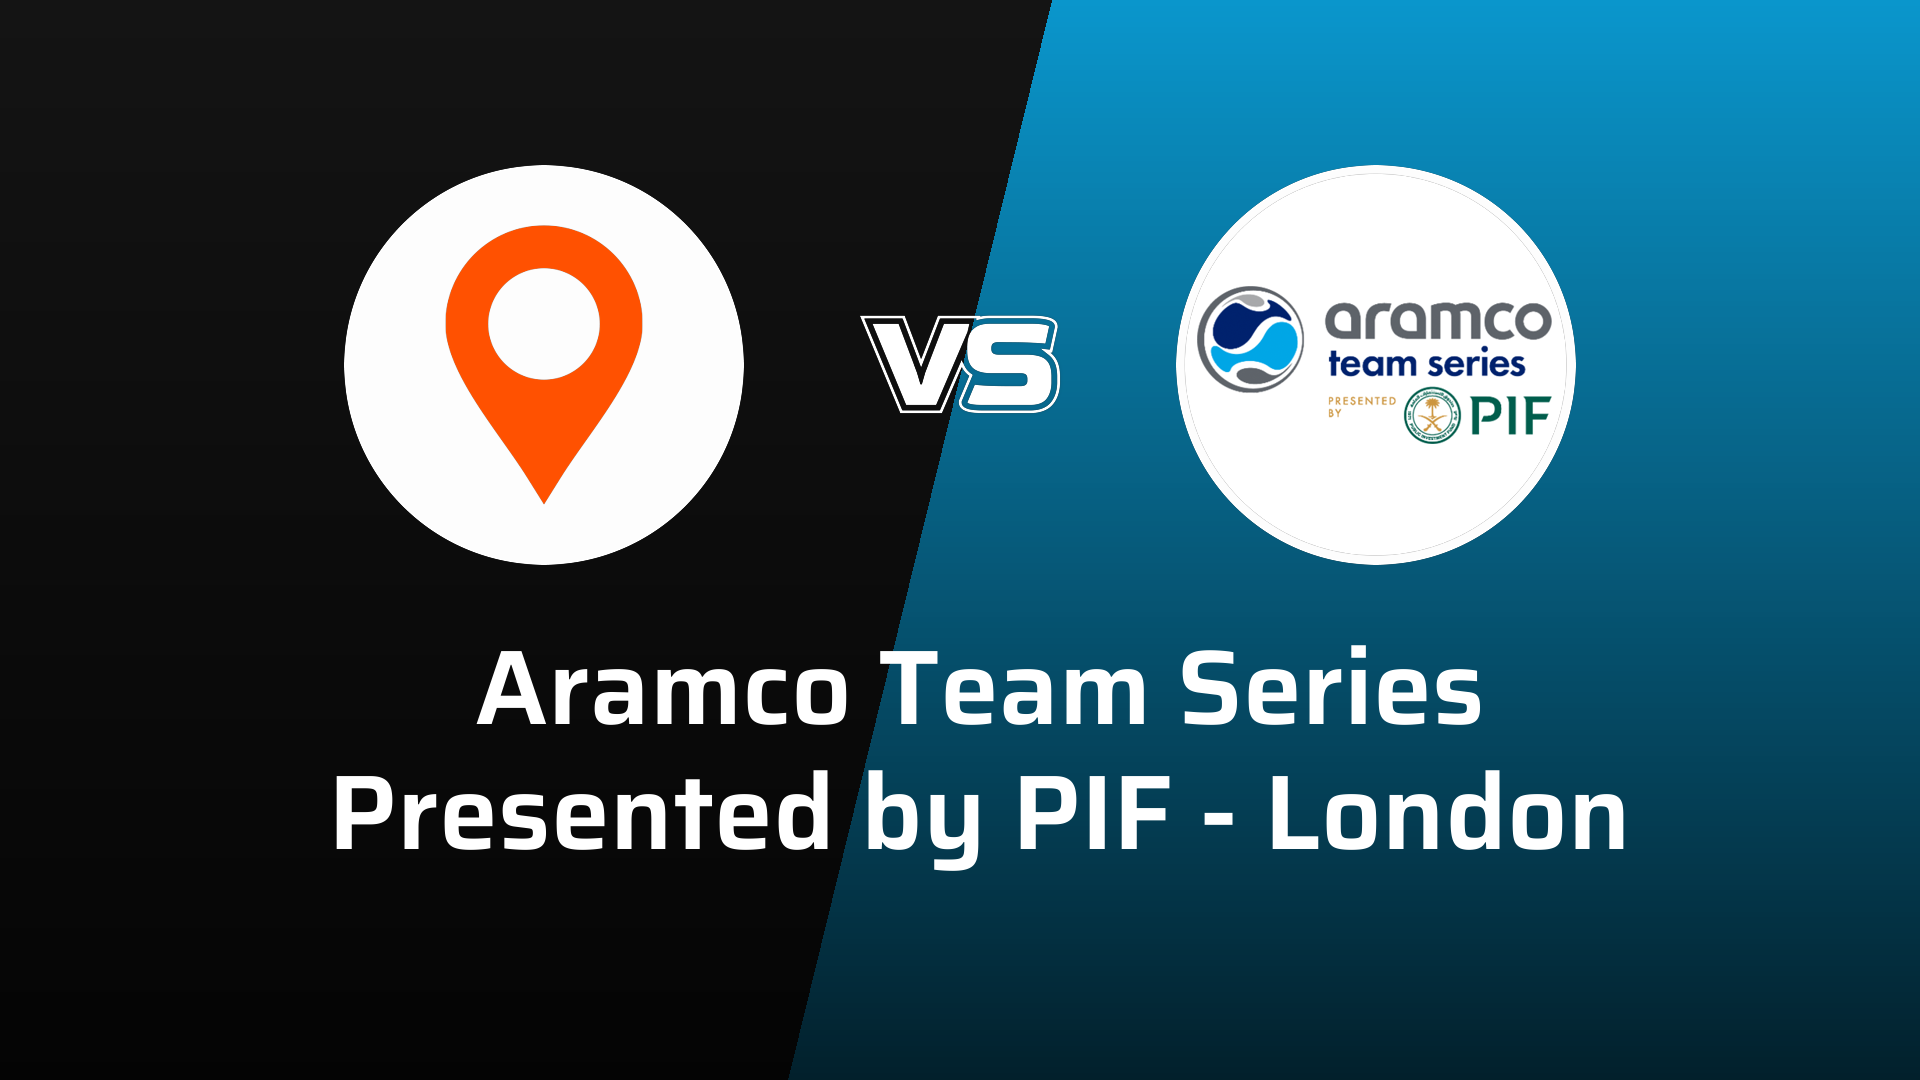 Aramco Team Series Presented by PIF - London